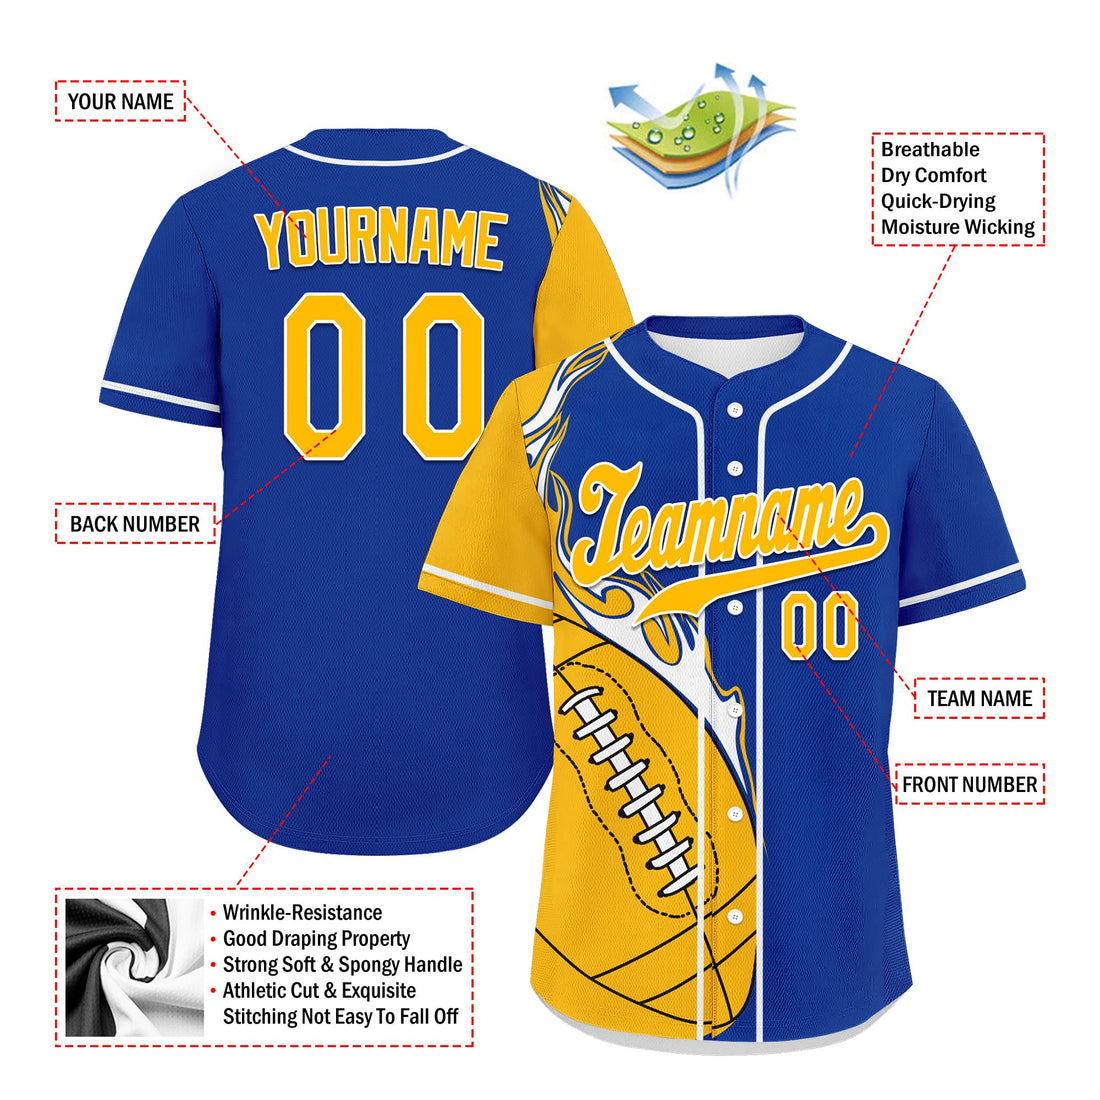 Custom Blue Yellow Classic Style Personalized Authentic Baseball Jersey UN002-D0b0a00-ae